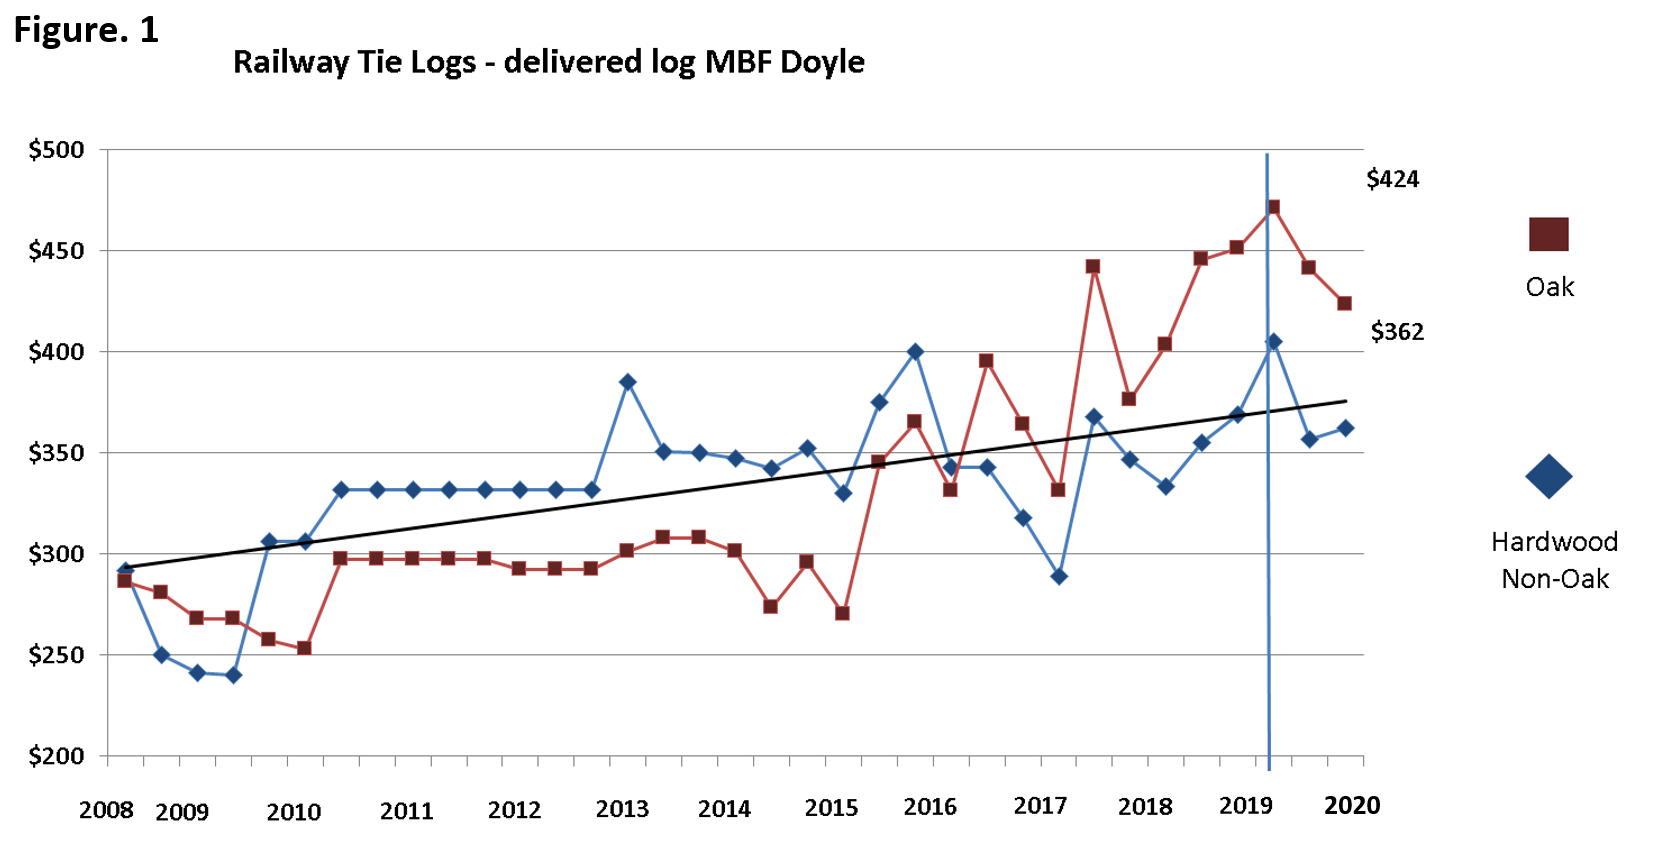 Graph of Railway Tie Logs - Delivered log MBF Doyle